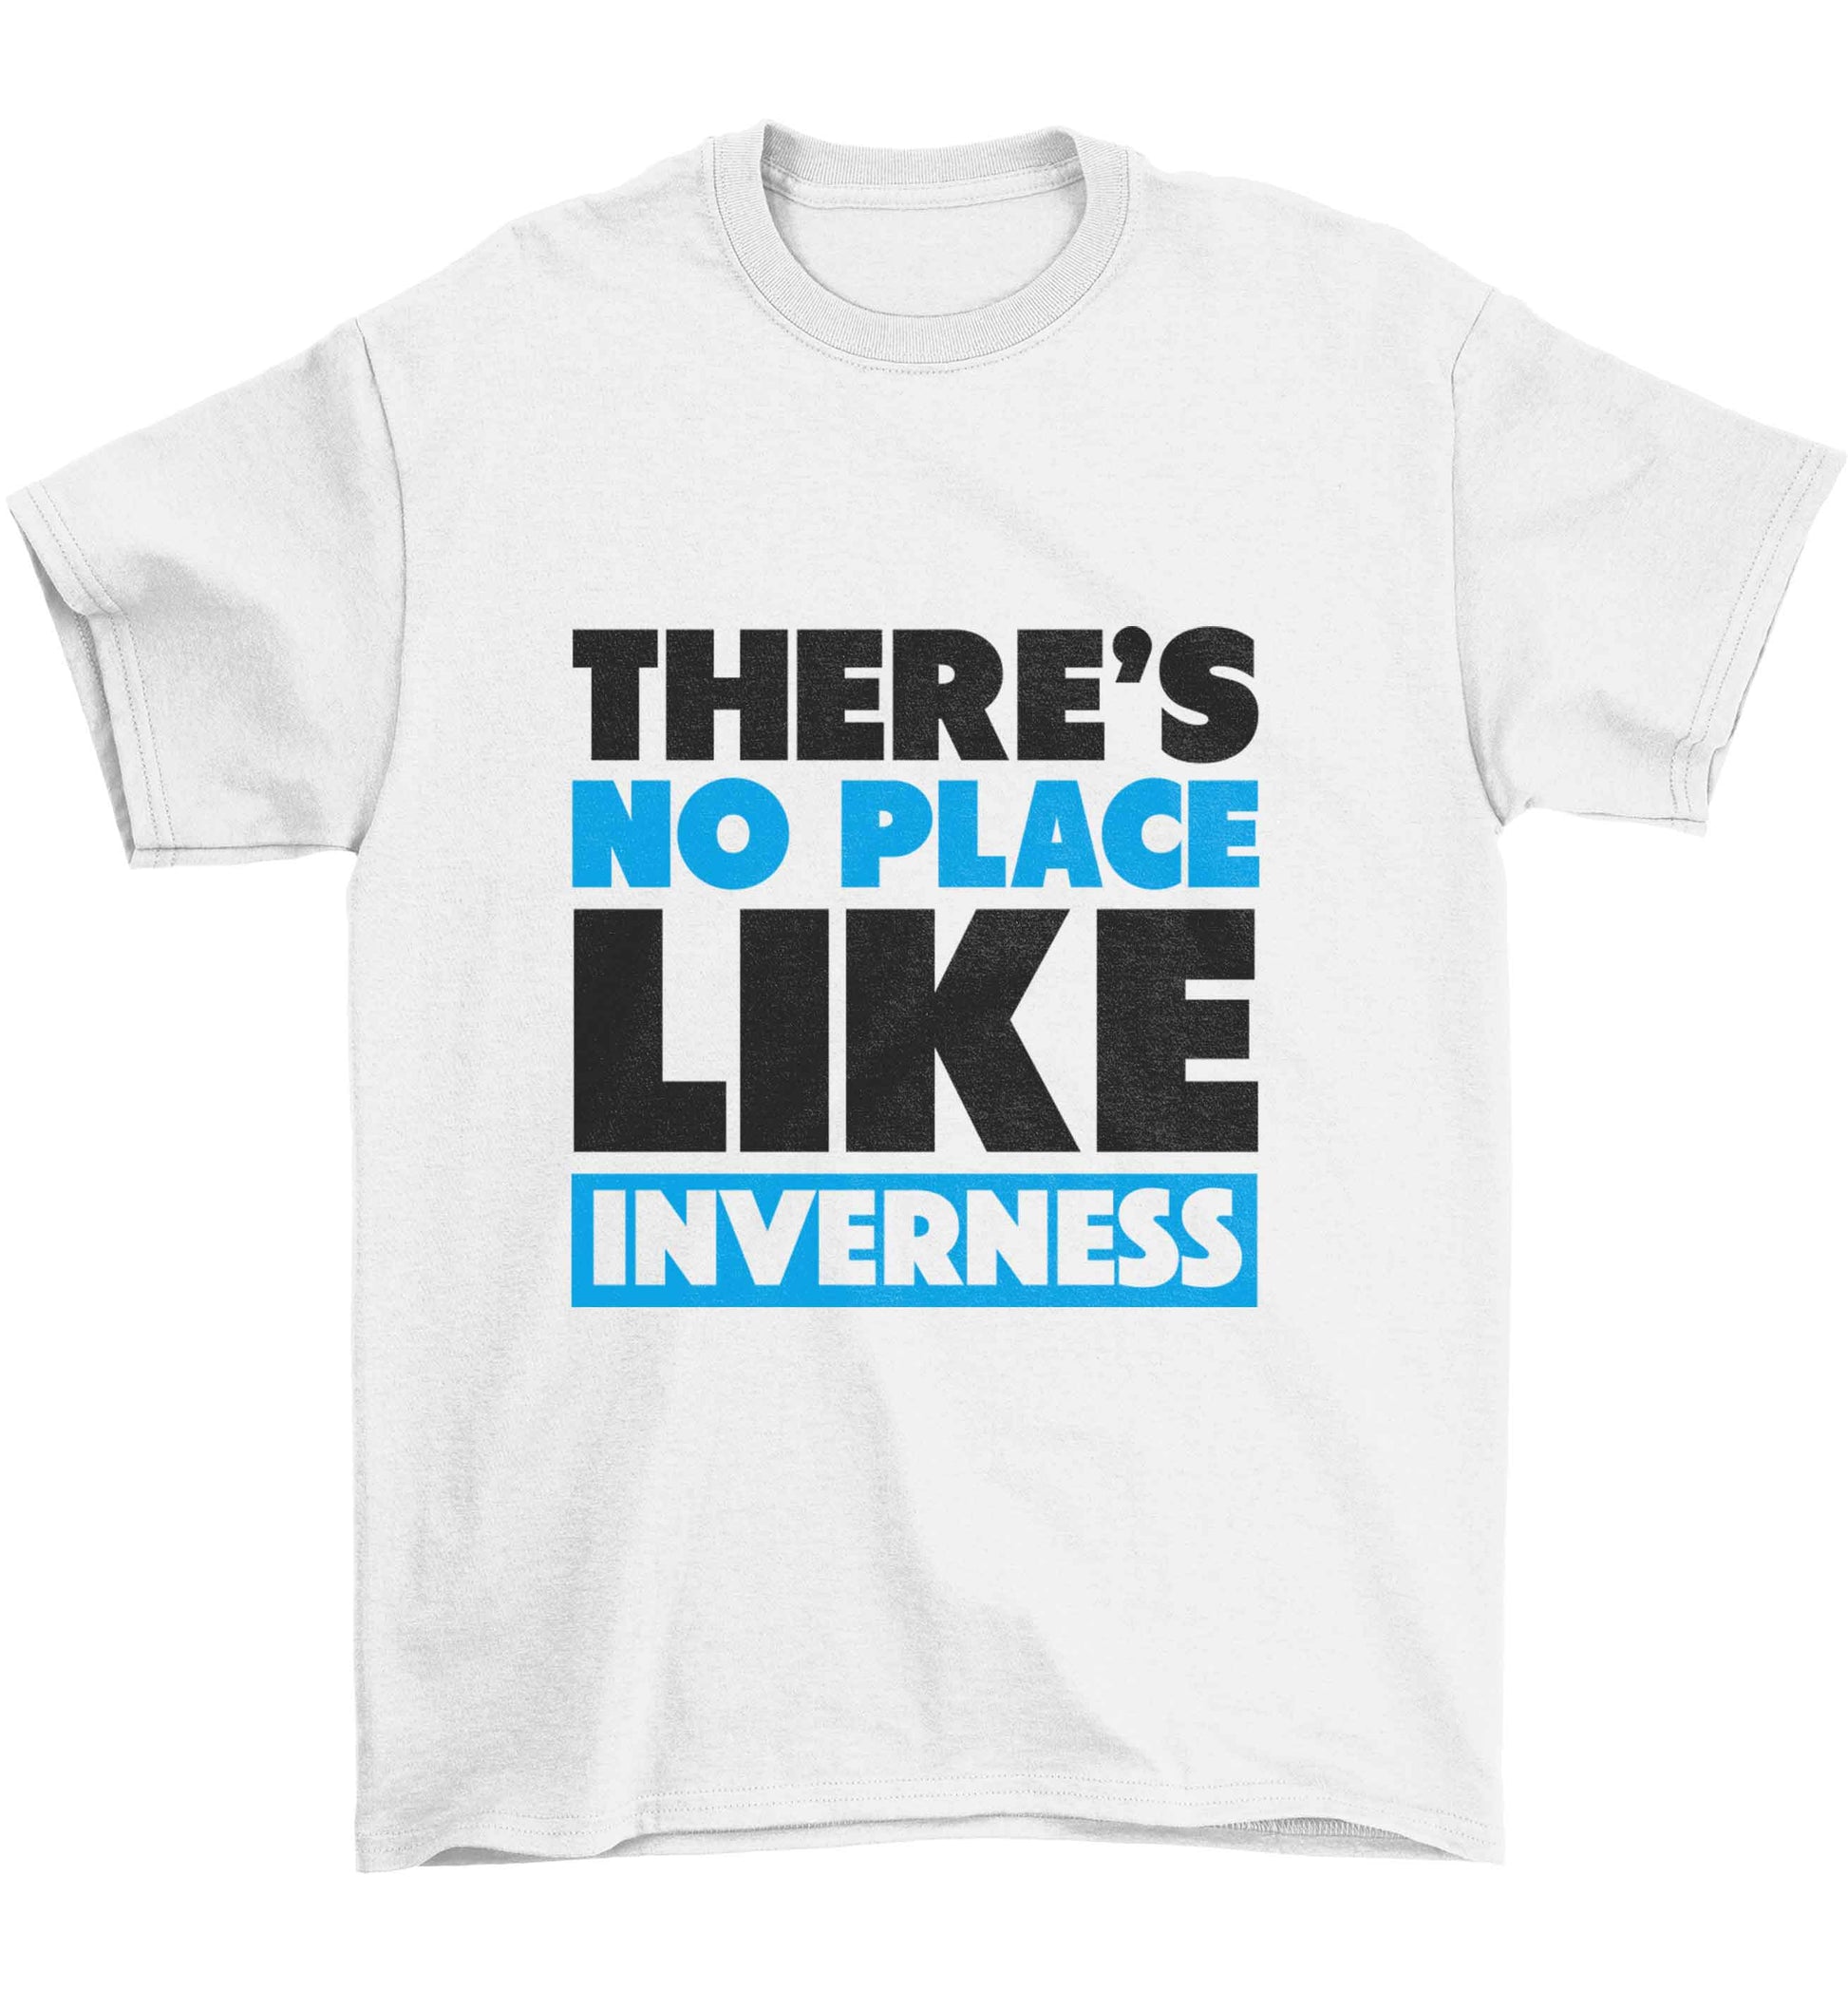 There's no place like Inverness Children's white Tshirt 12-13 Years